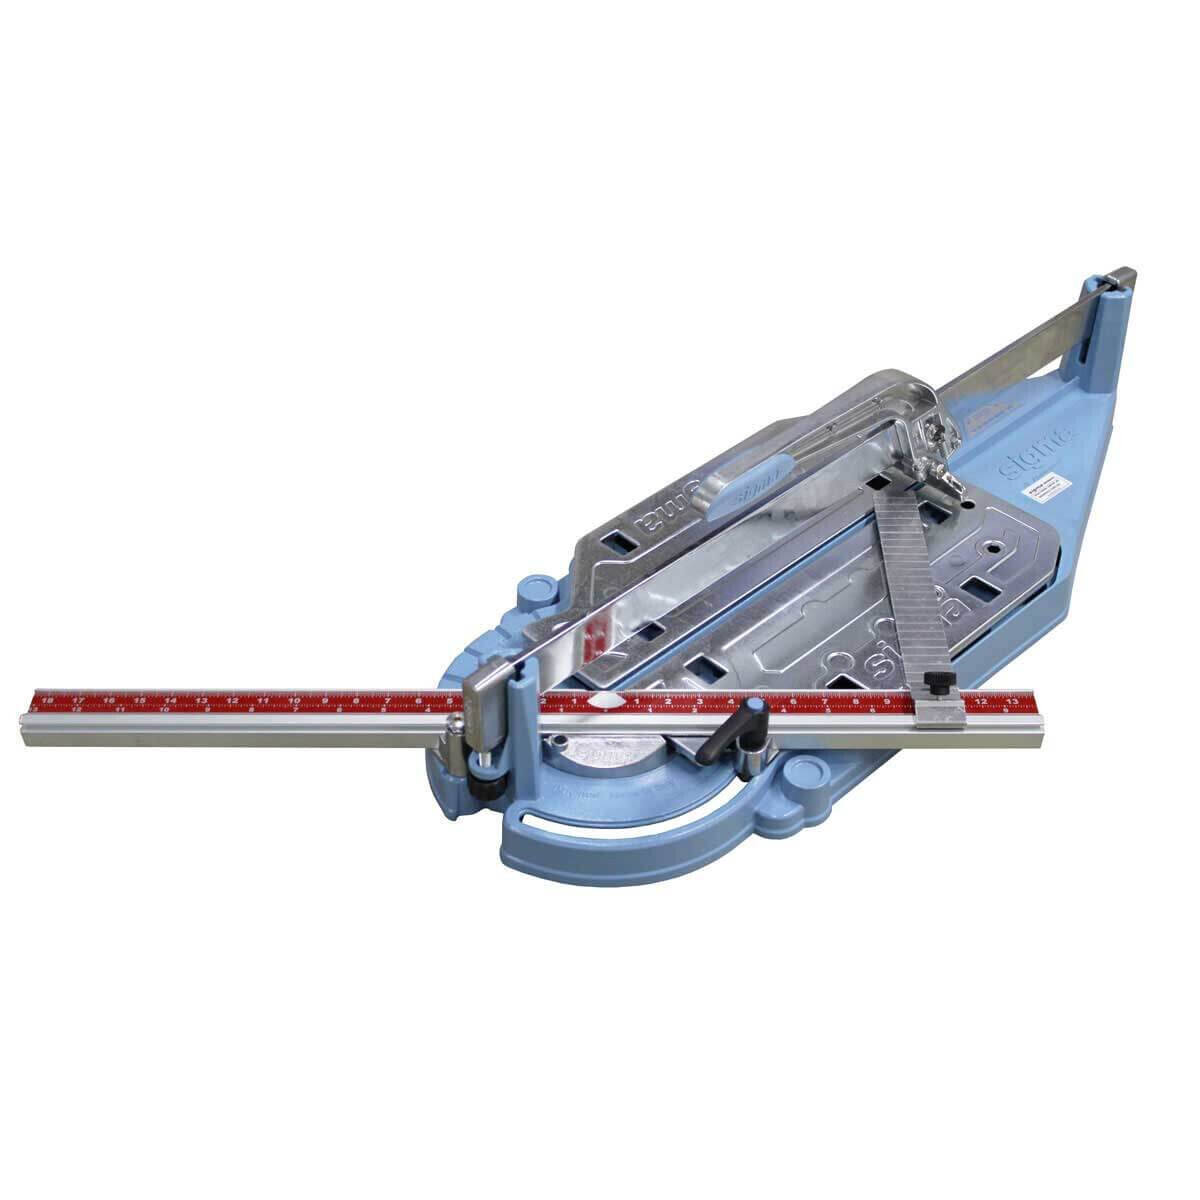 Sigma Tile Cutter With Max Handle - Sigma Italia From Contractors Direct